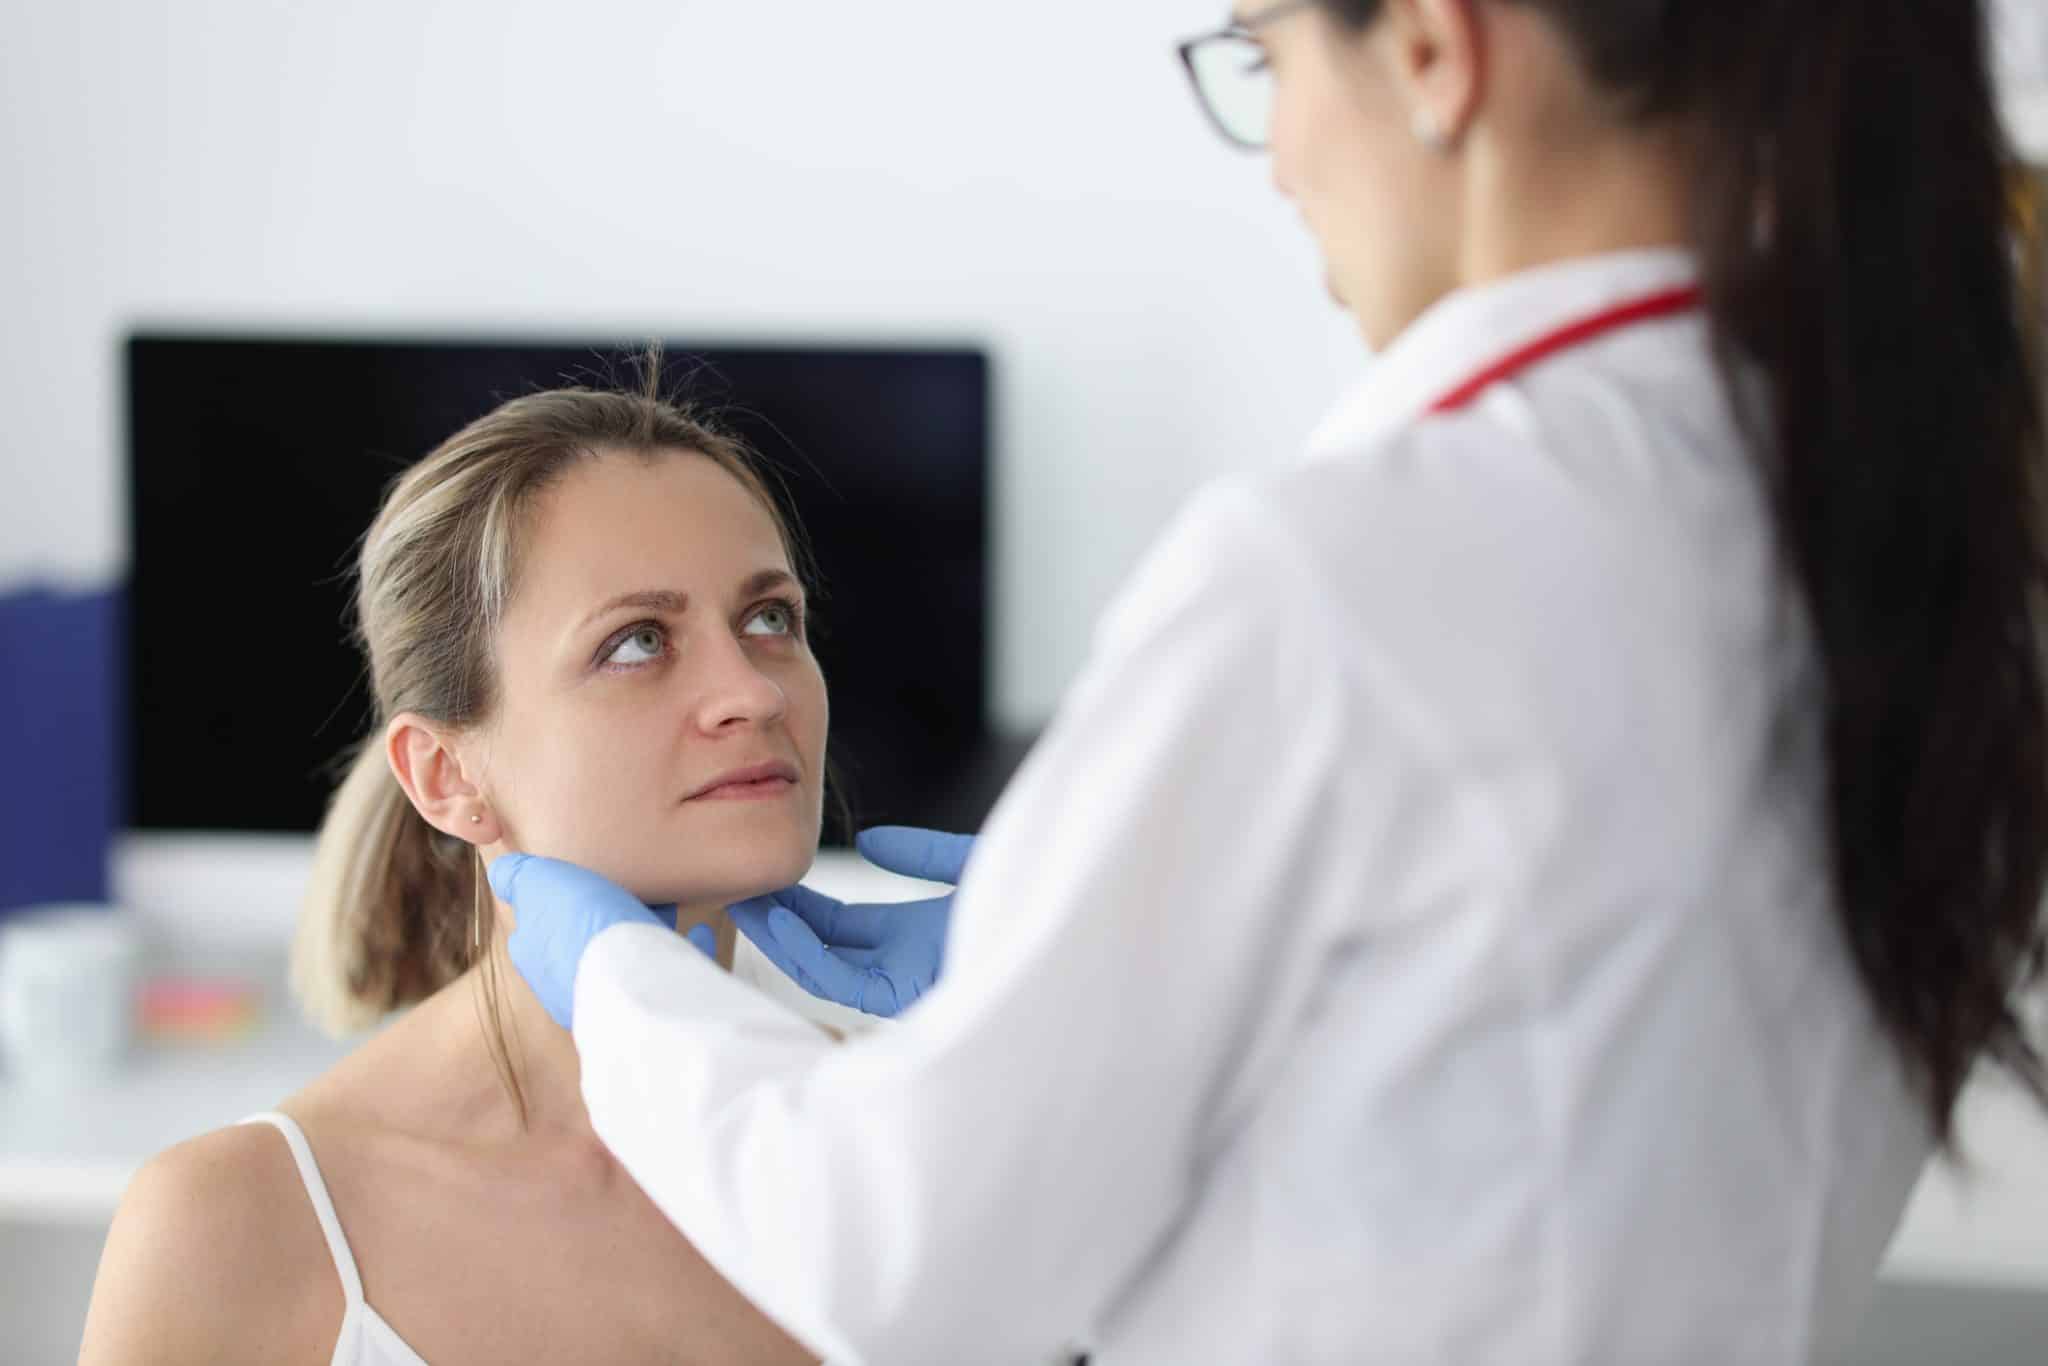 Doctor examining a woman's salivary glands.